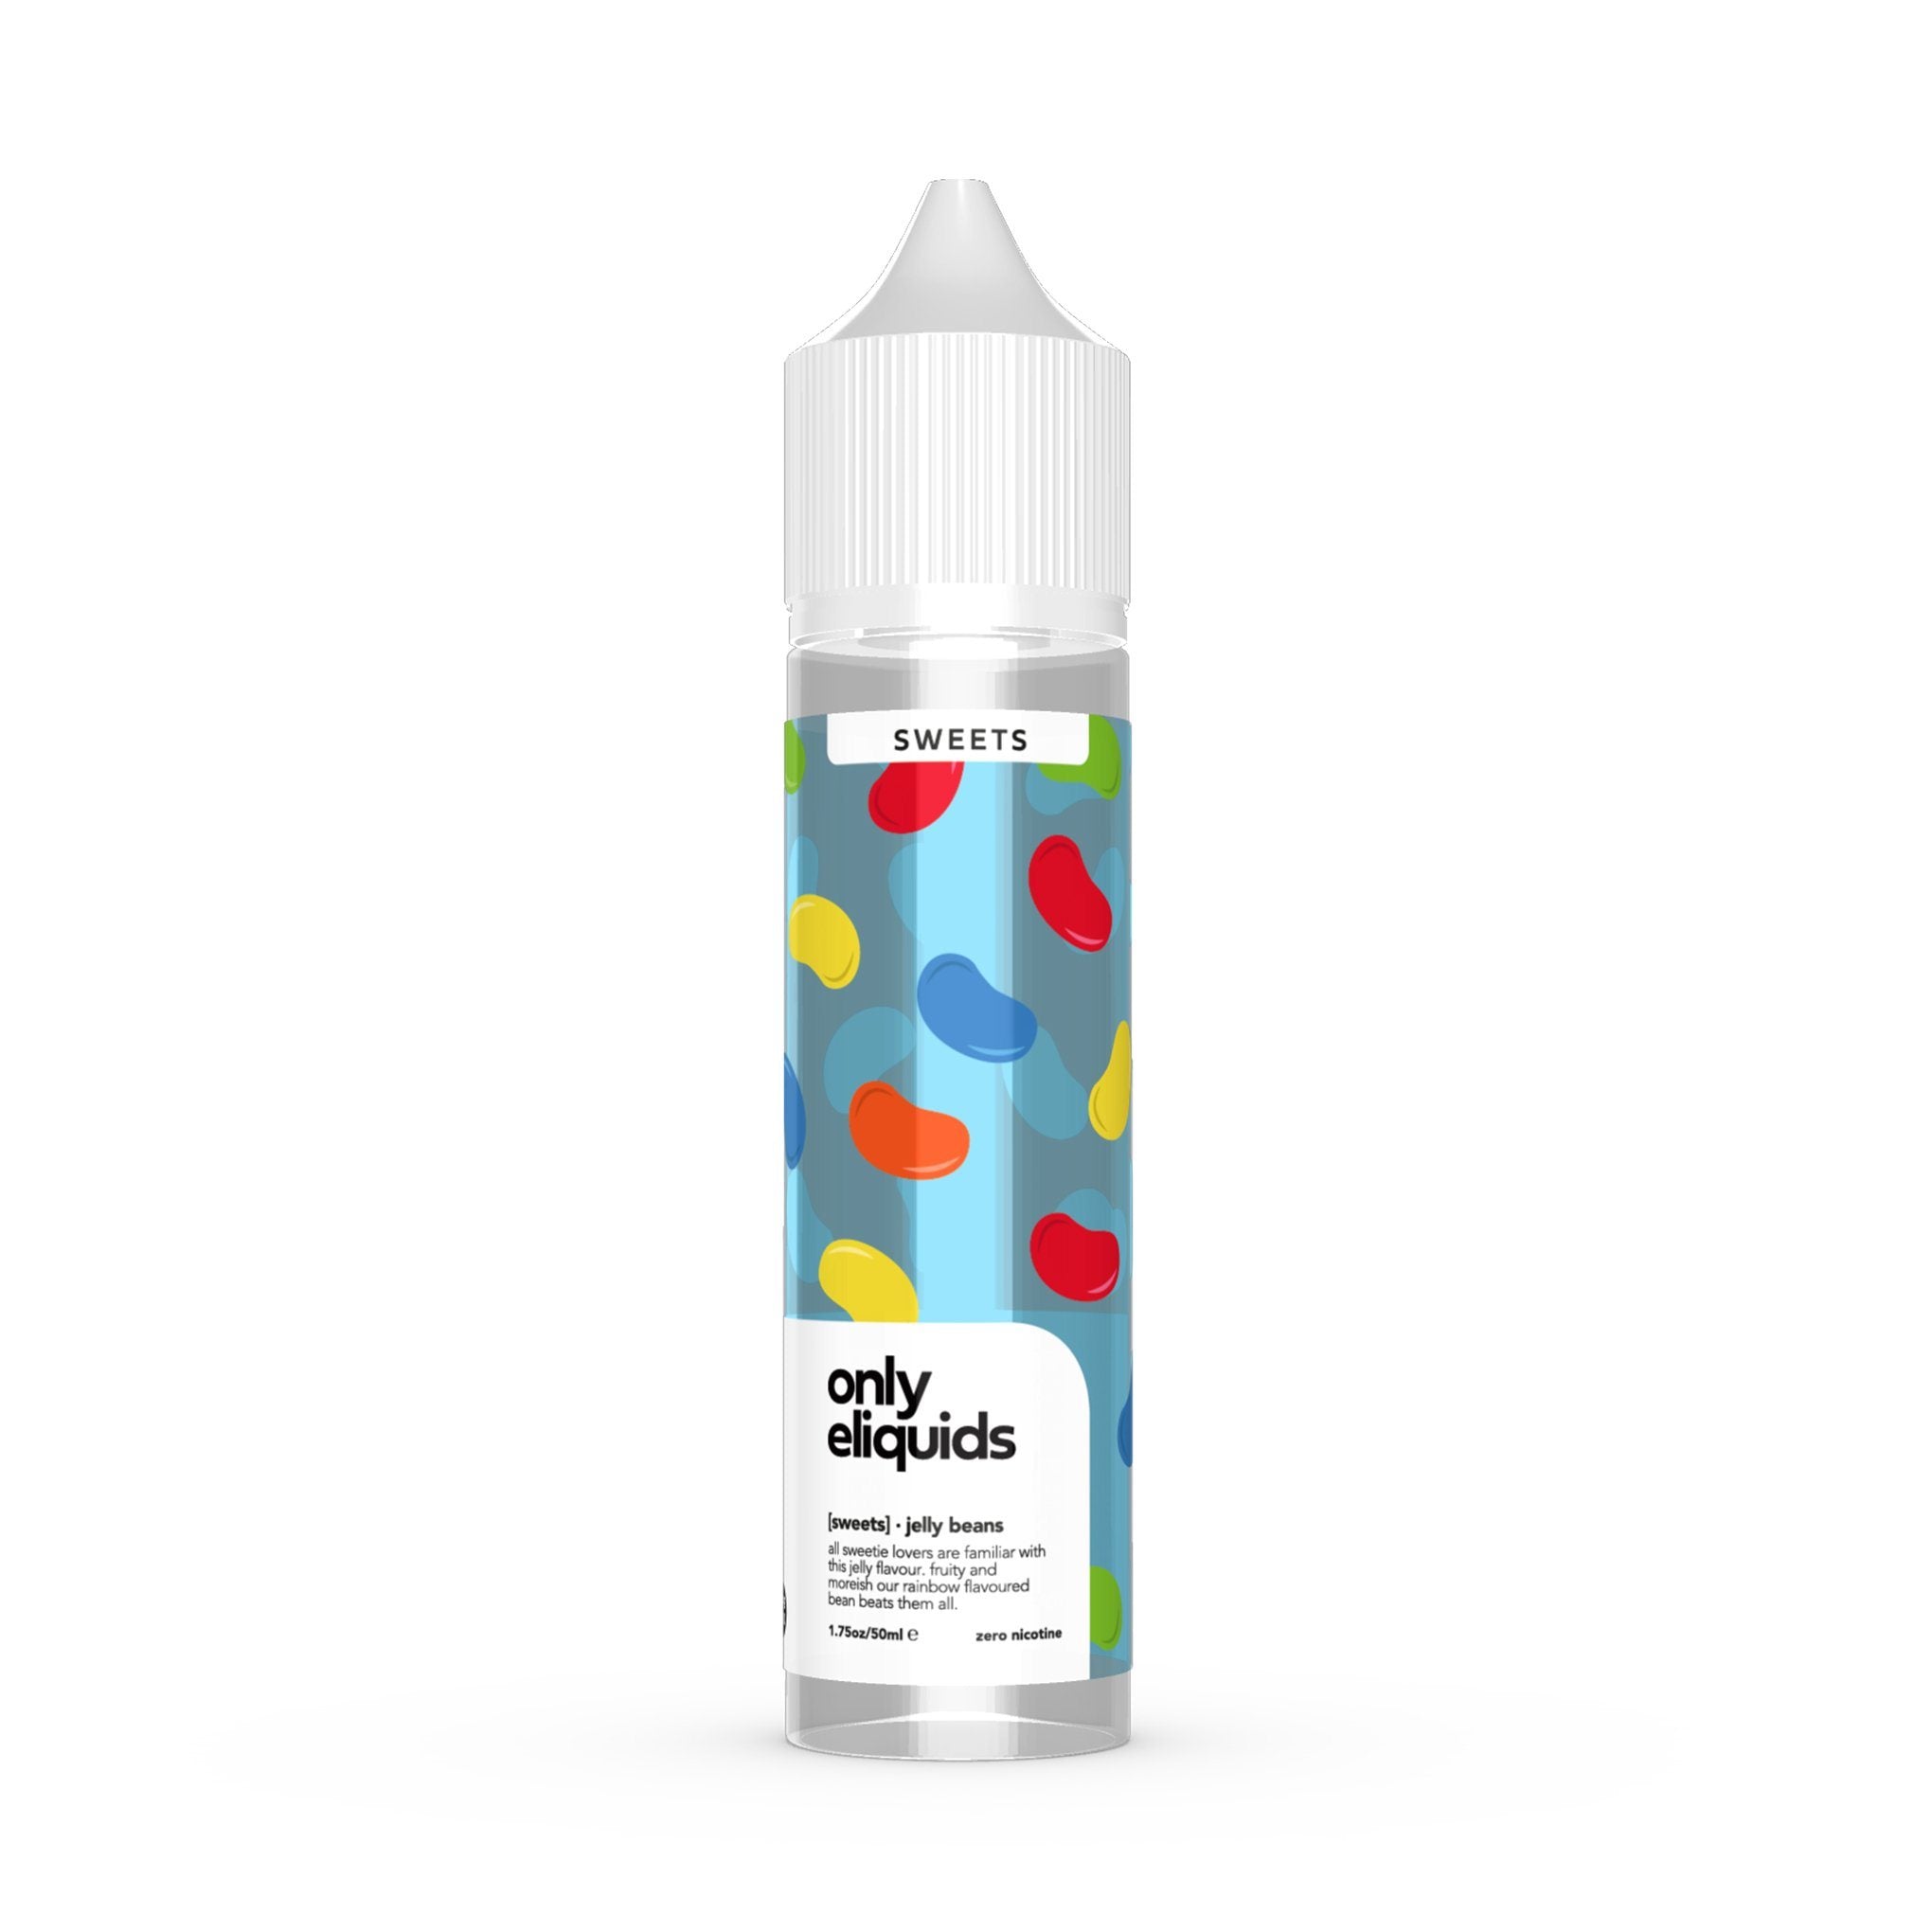 Only E-Liquids Sweets Range Jelly Beans